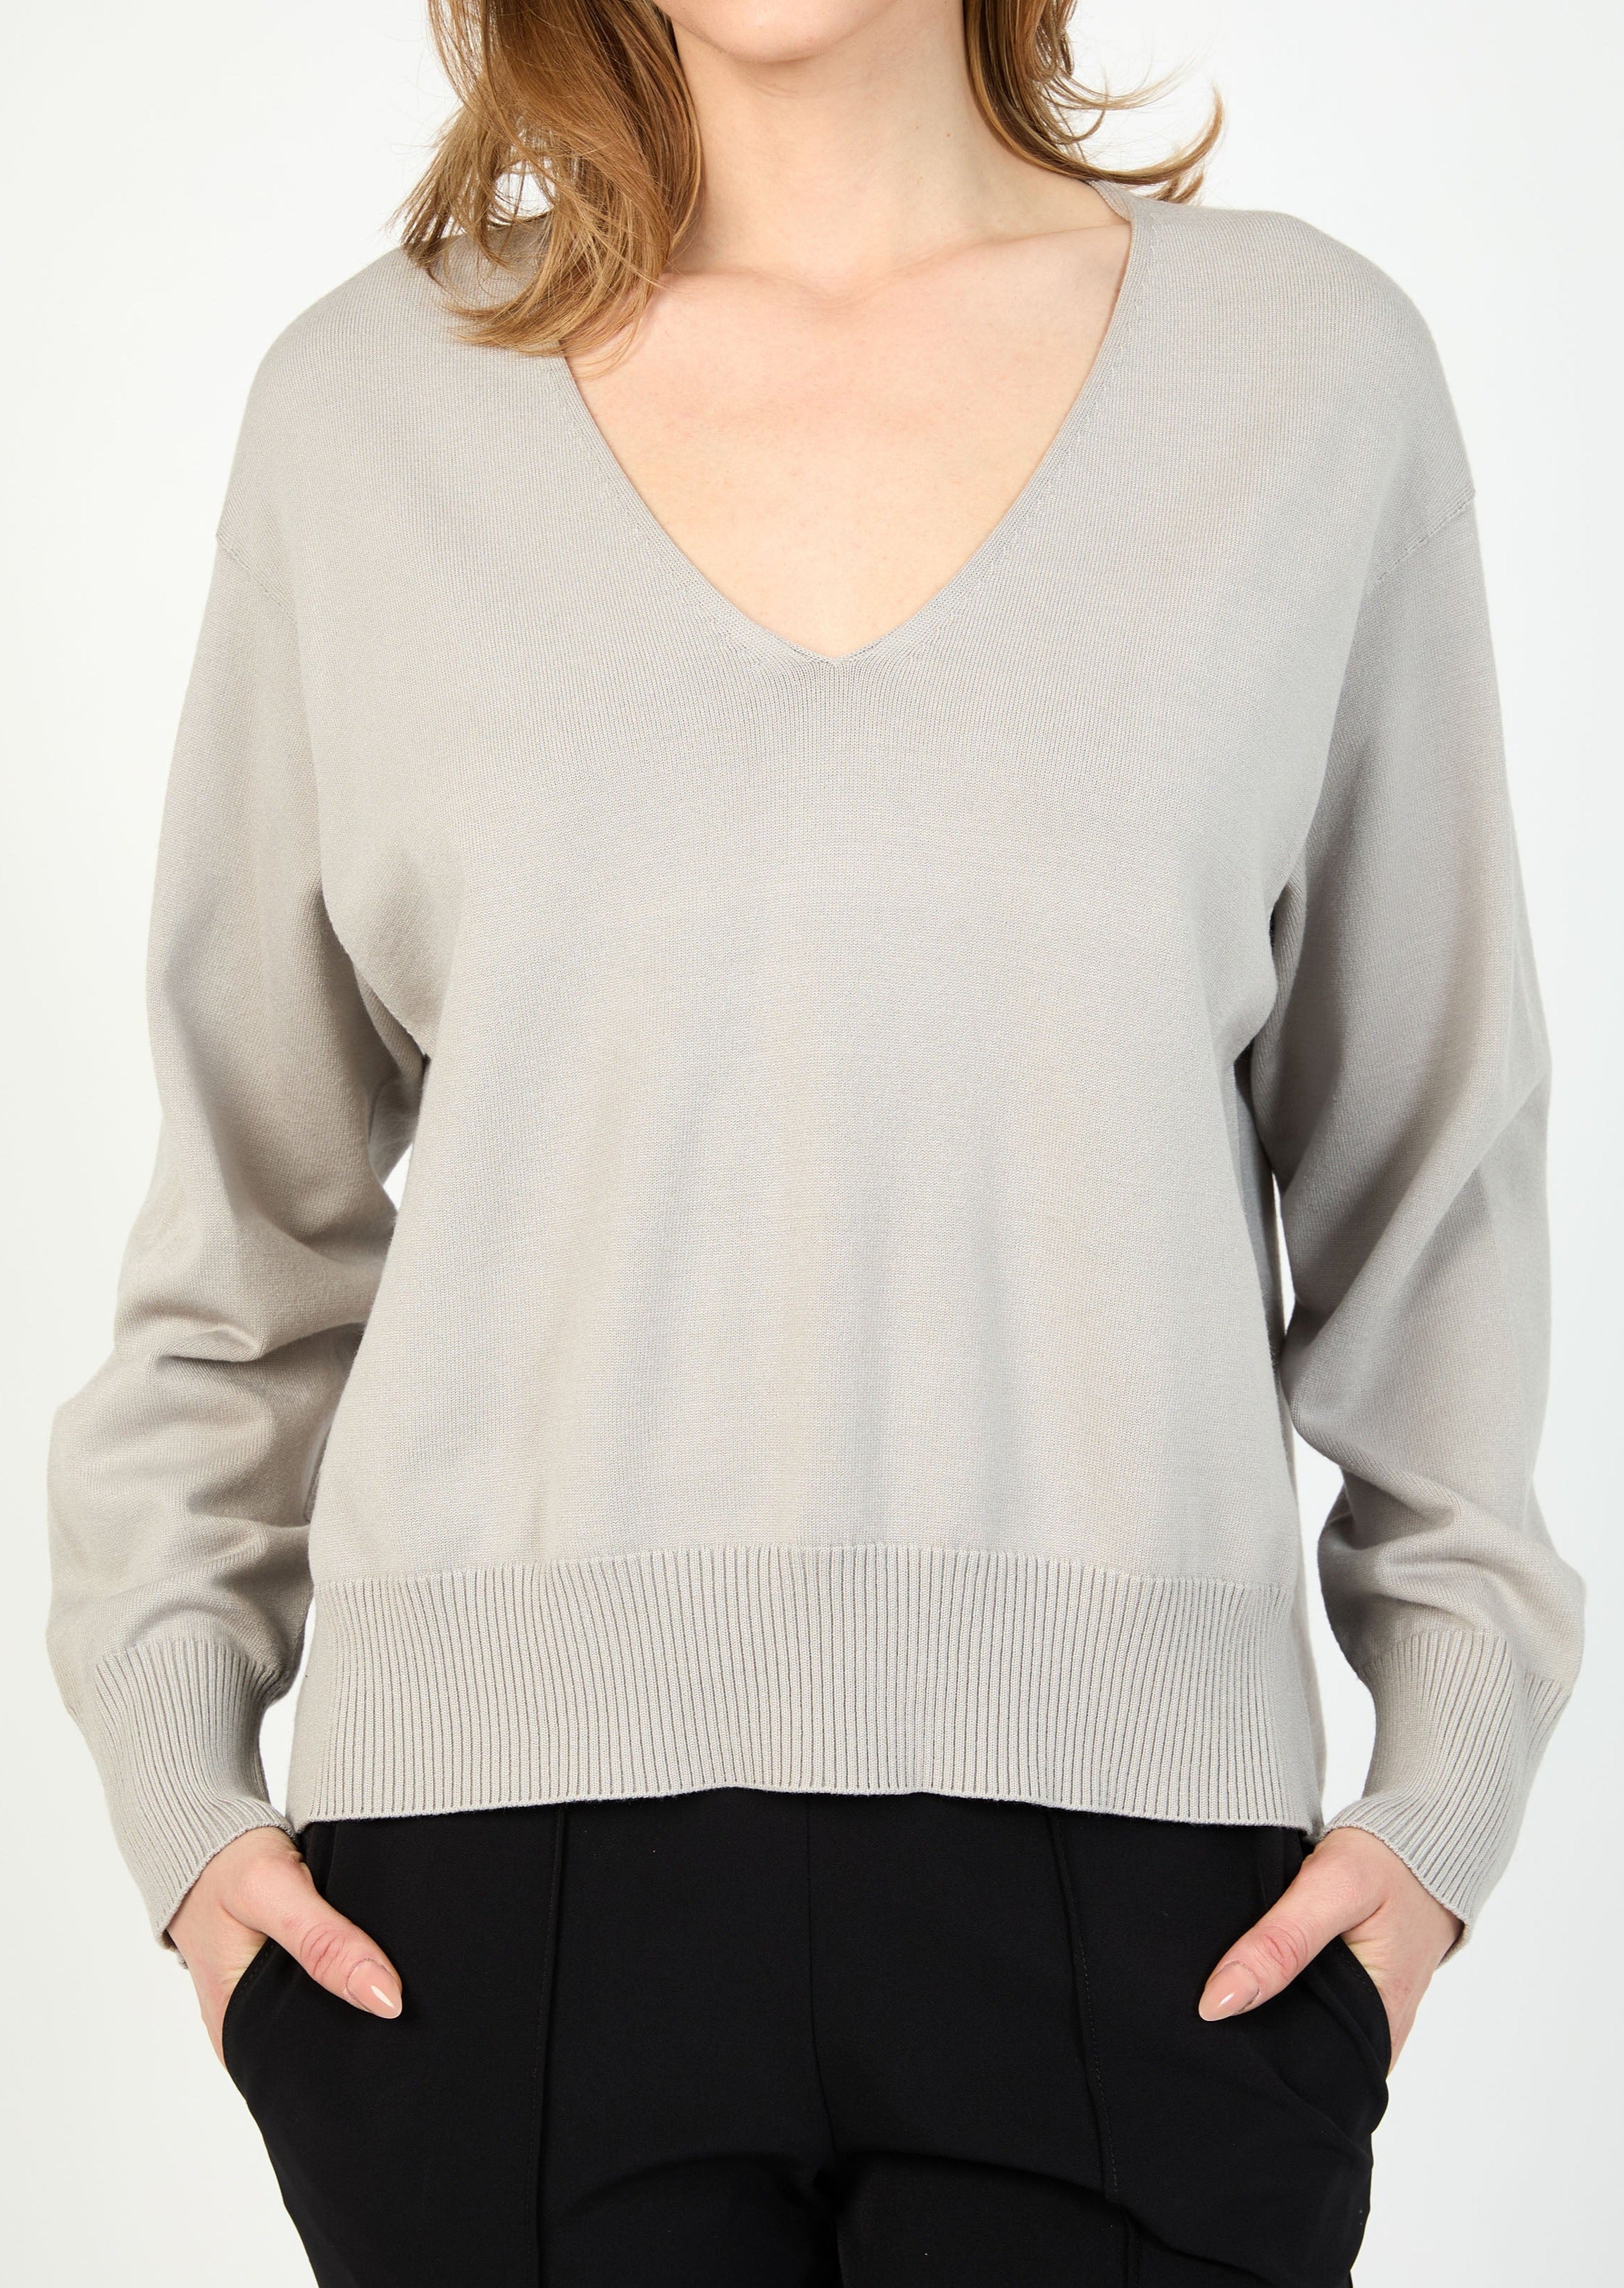 ECOVERA KNIT HIGH LOW SWEATER